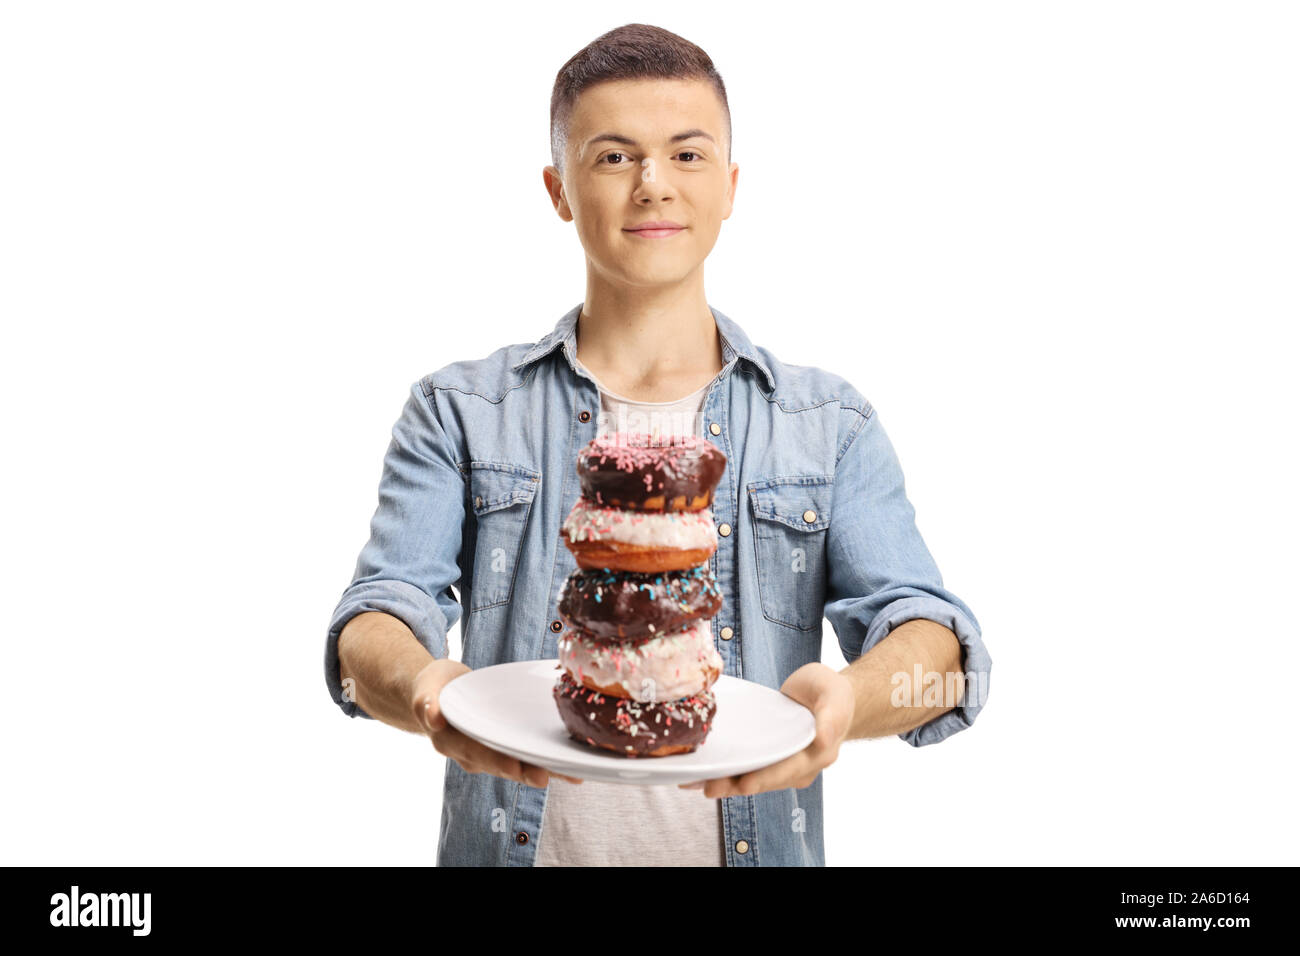 Teenage boy holding a plate of donuts isolated on white background Stock Photo